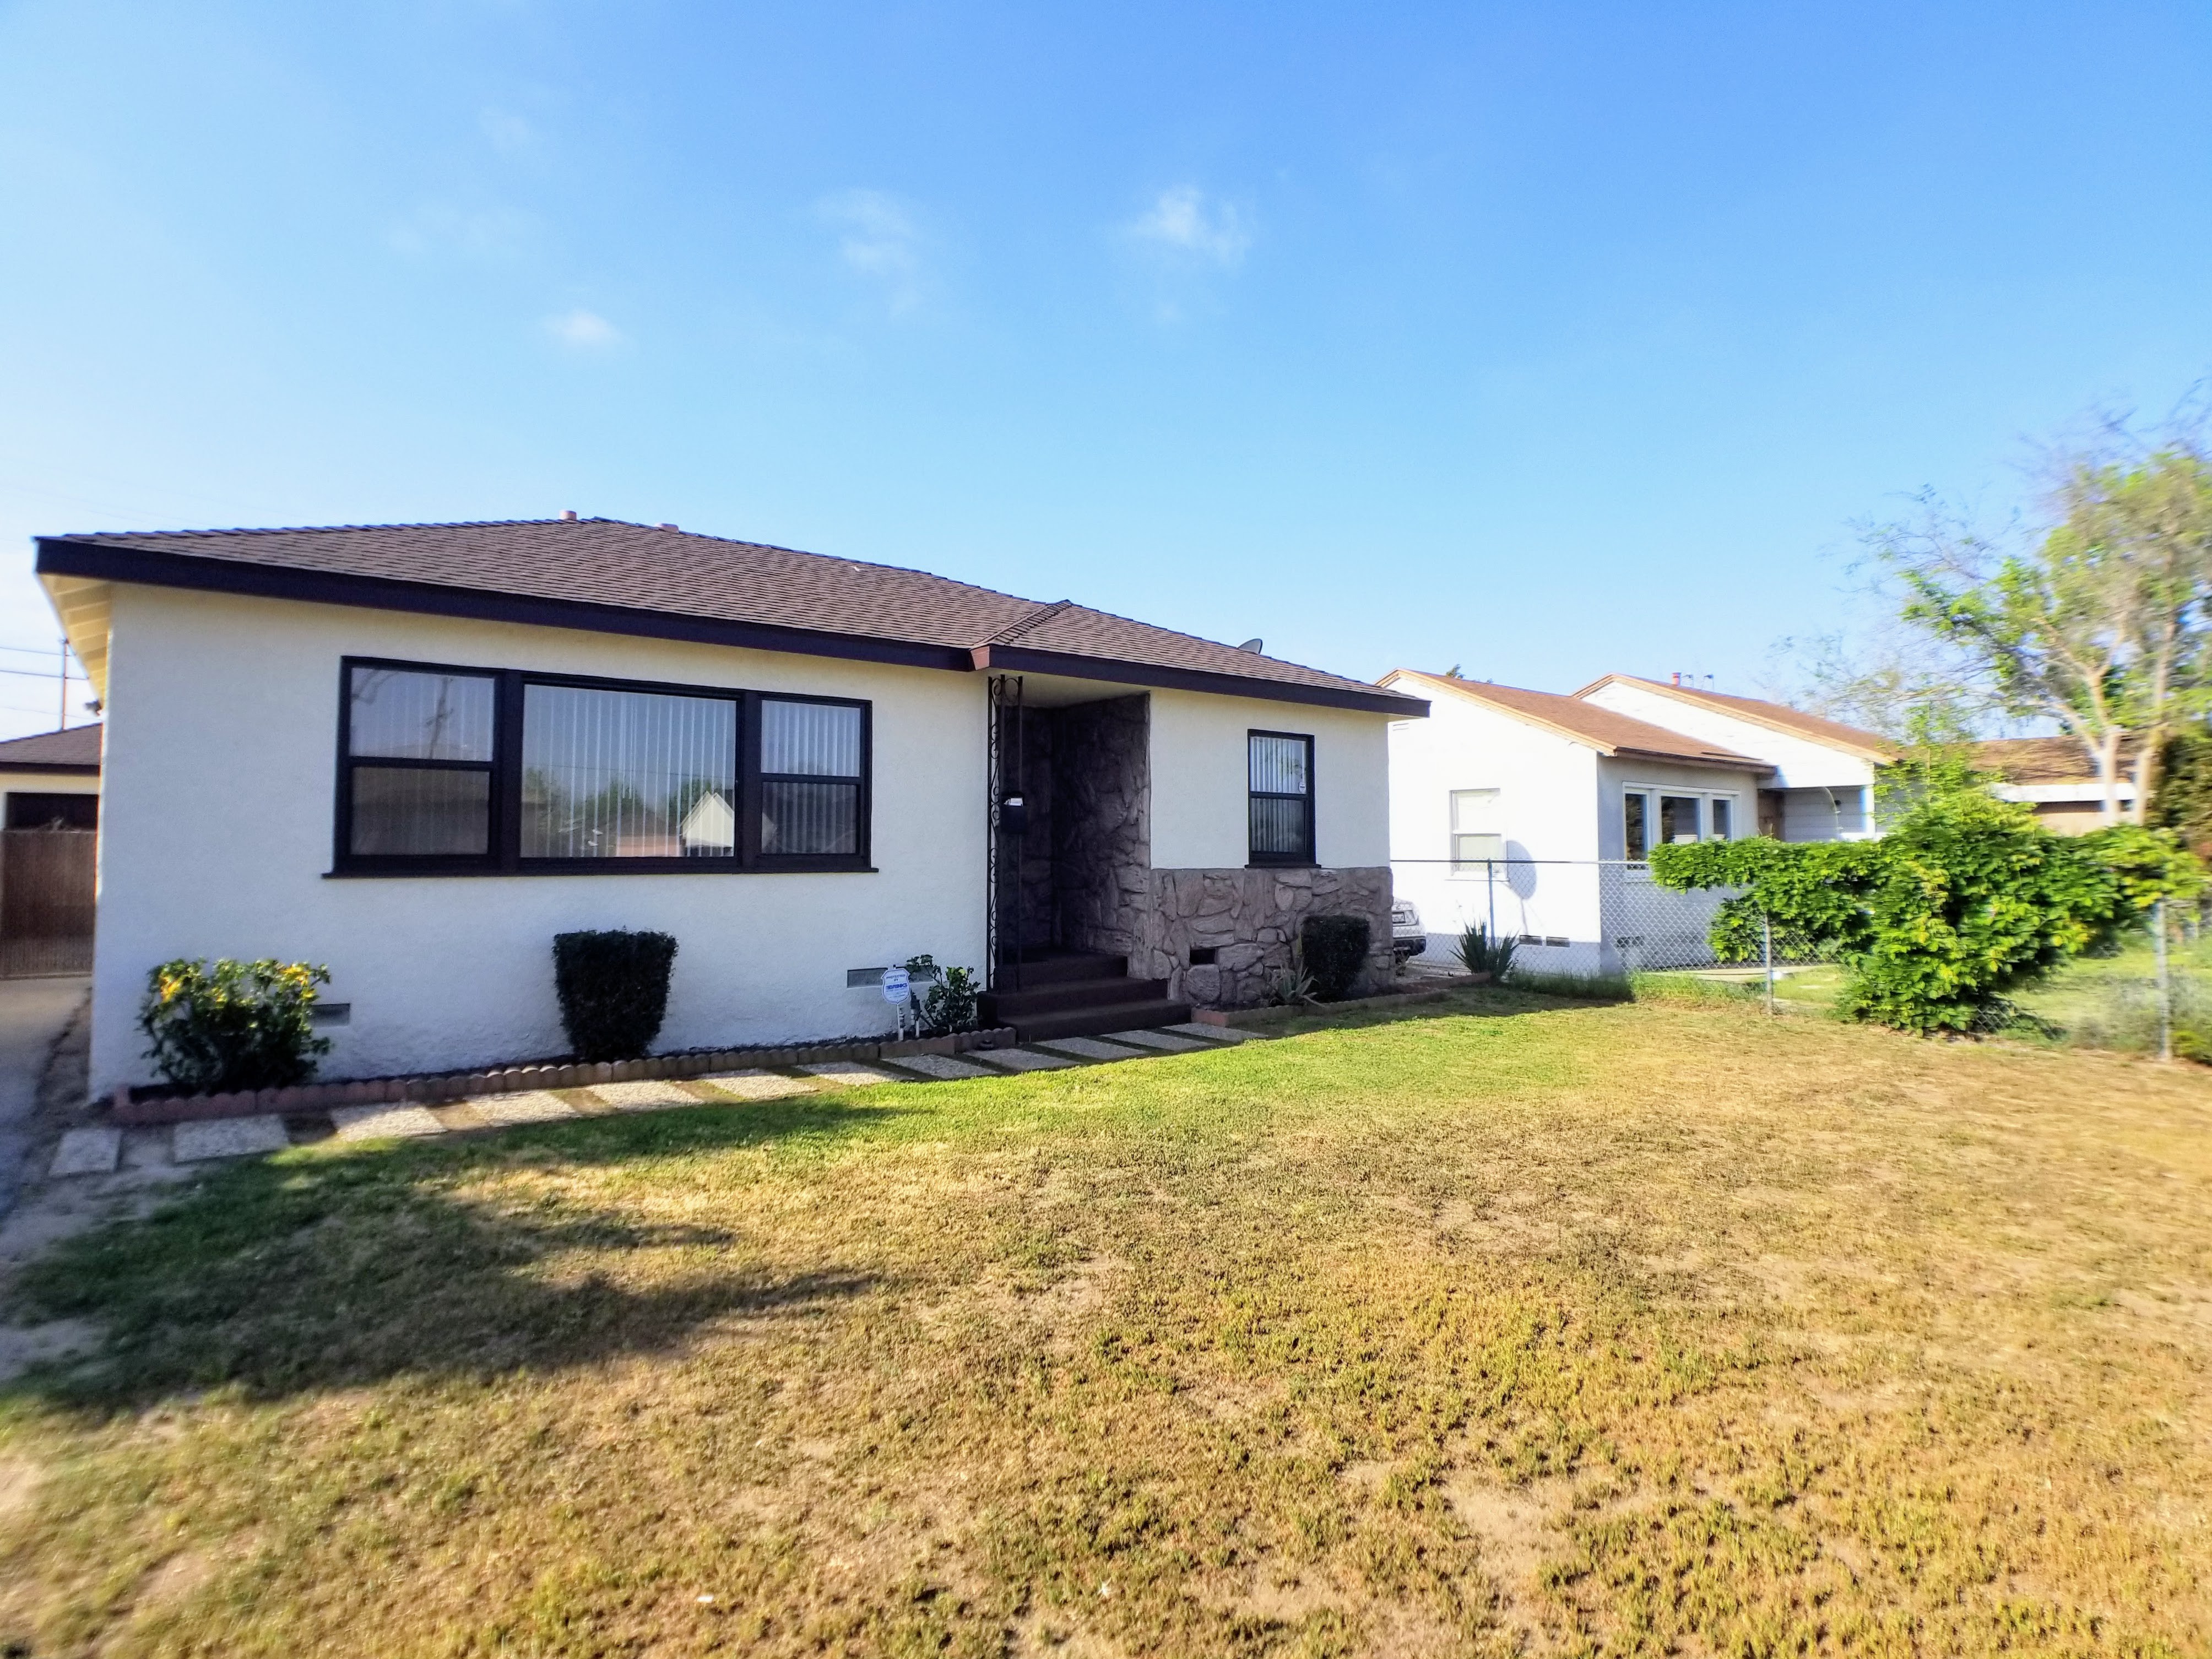 Property Listing For 04/06/21